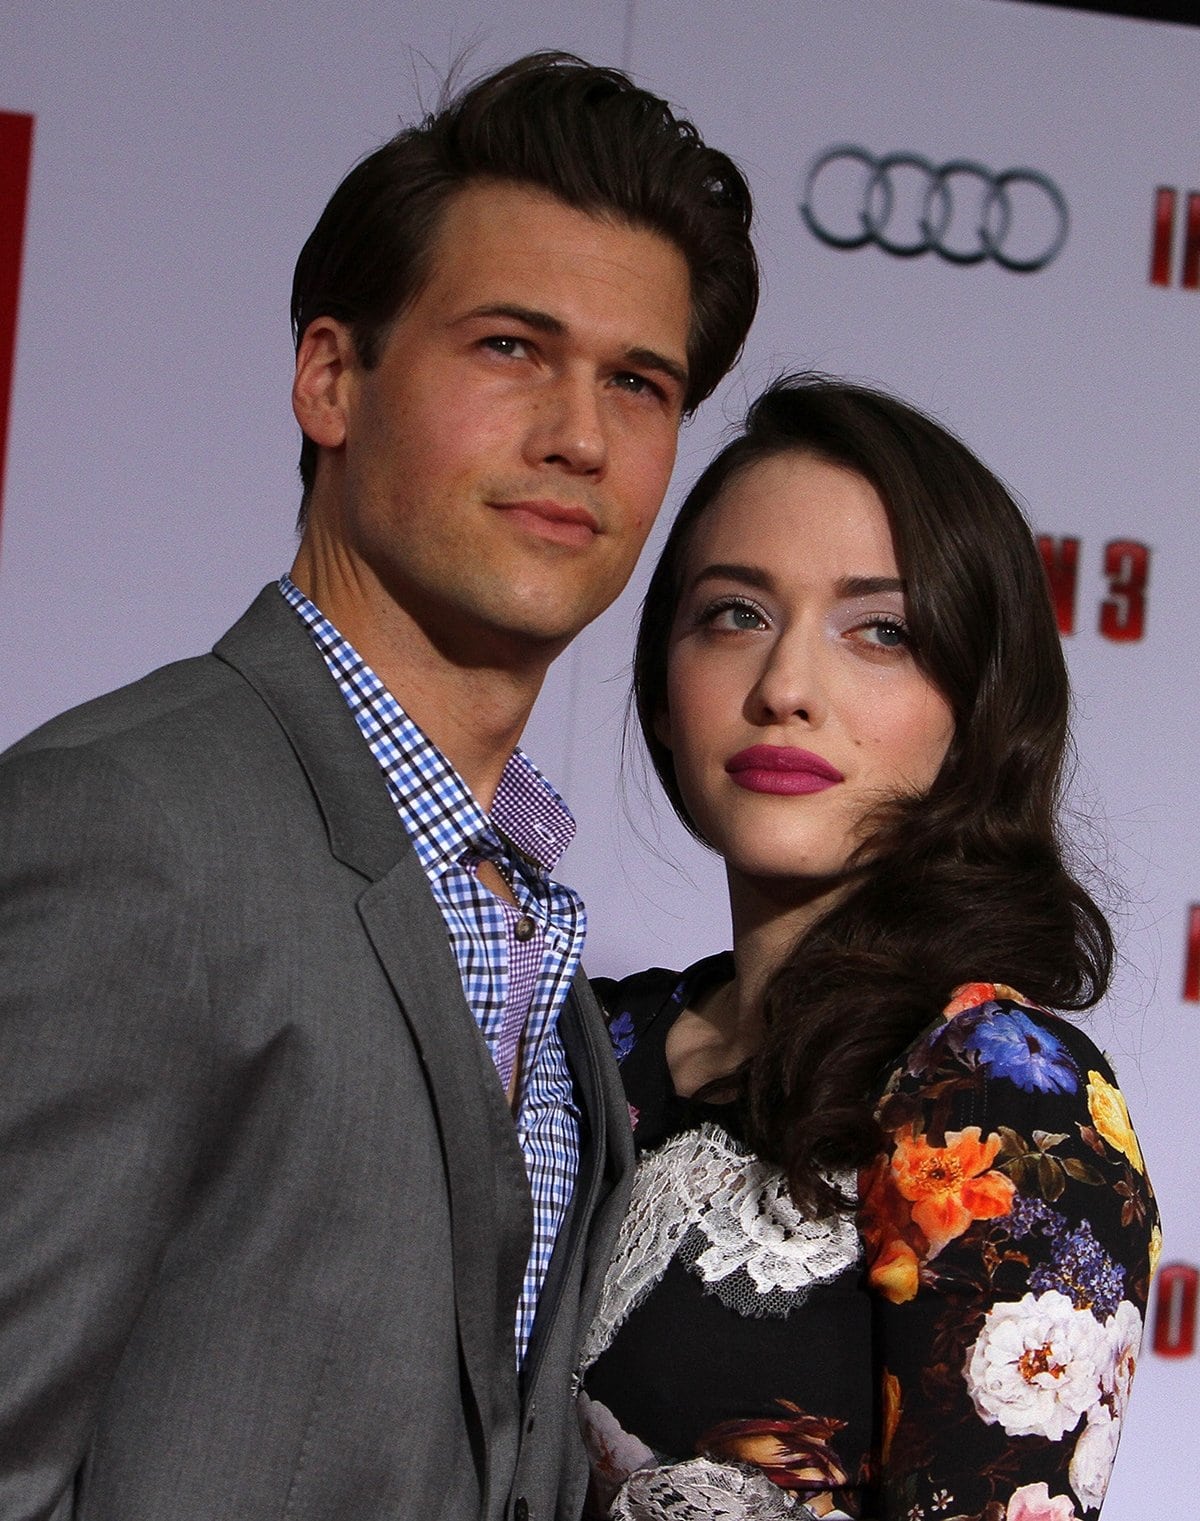 Kat Dennings and Nick Zano met on the set of 2 Broke Girls and dated from December 2011 to June 2014